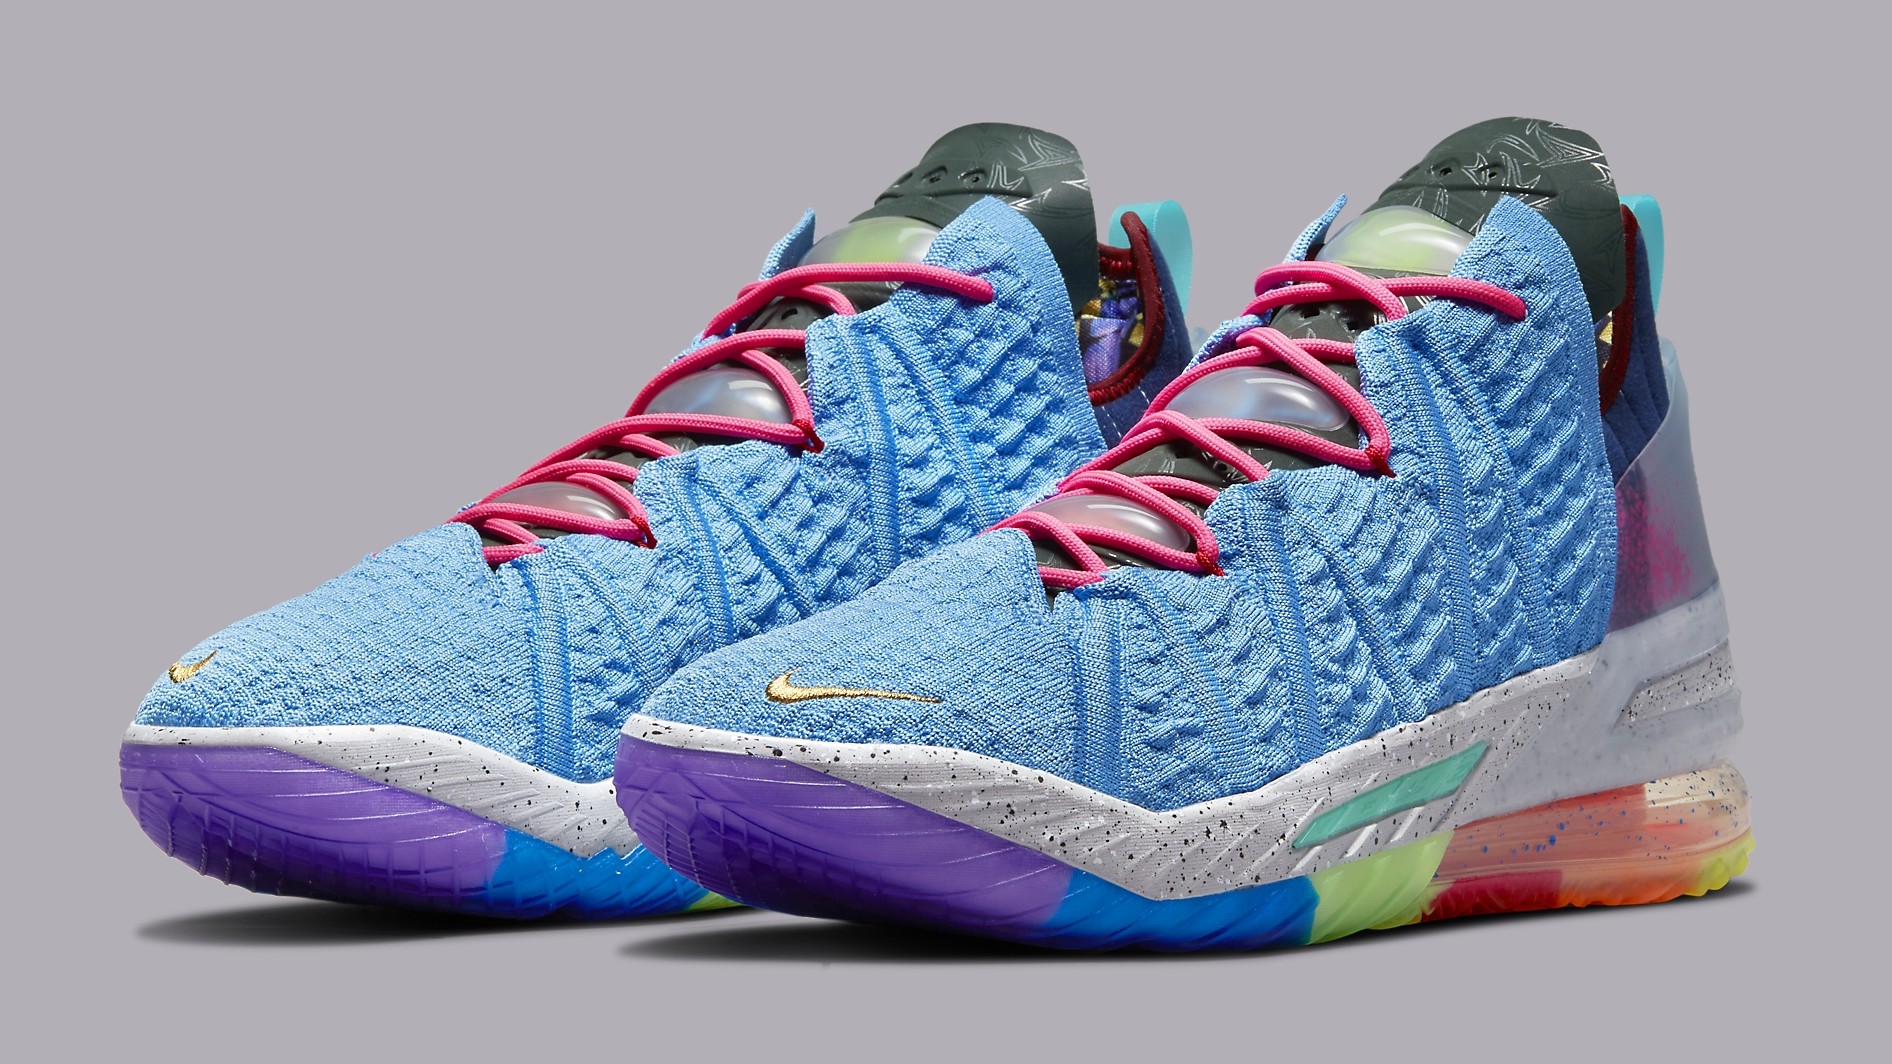 Past Nike LeBron Colorways Come Together on This LeBron 18 | Complex